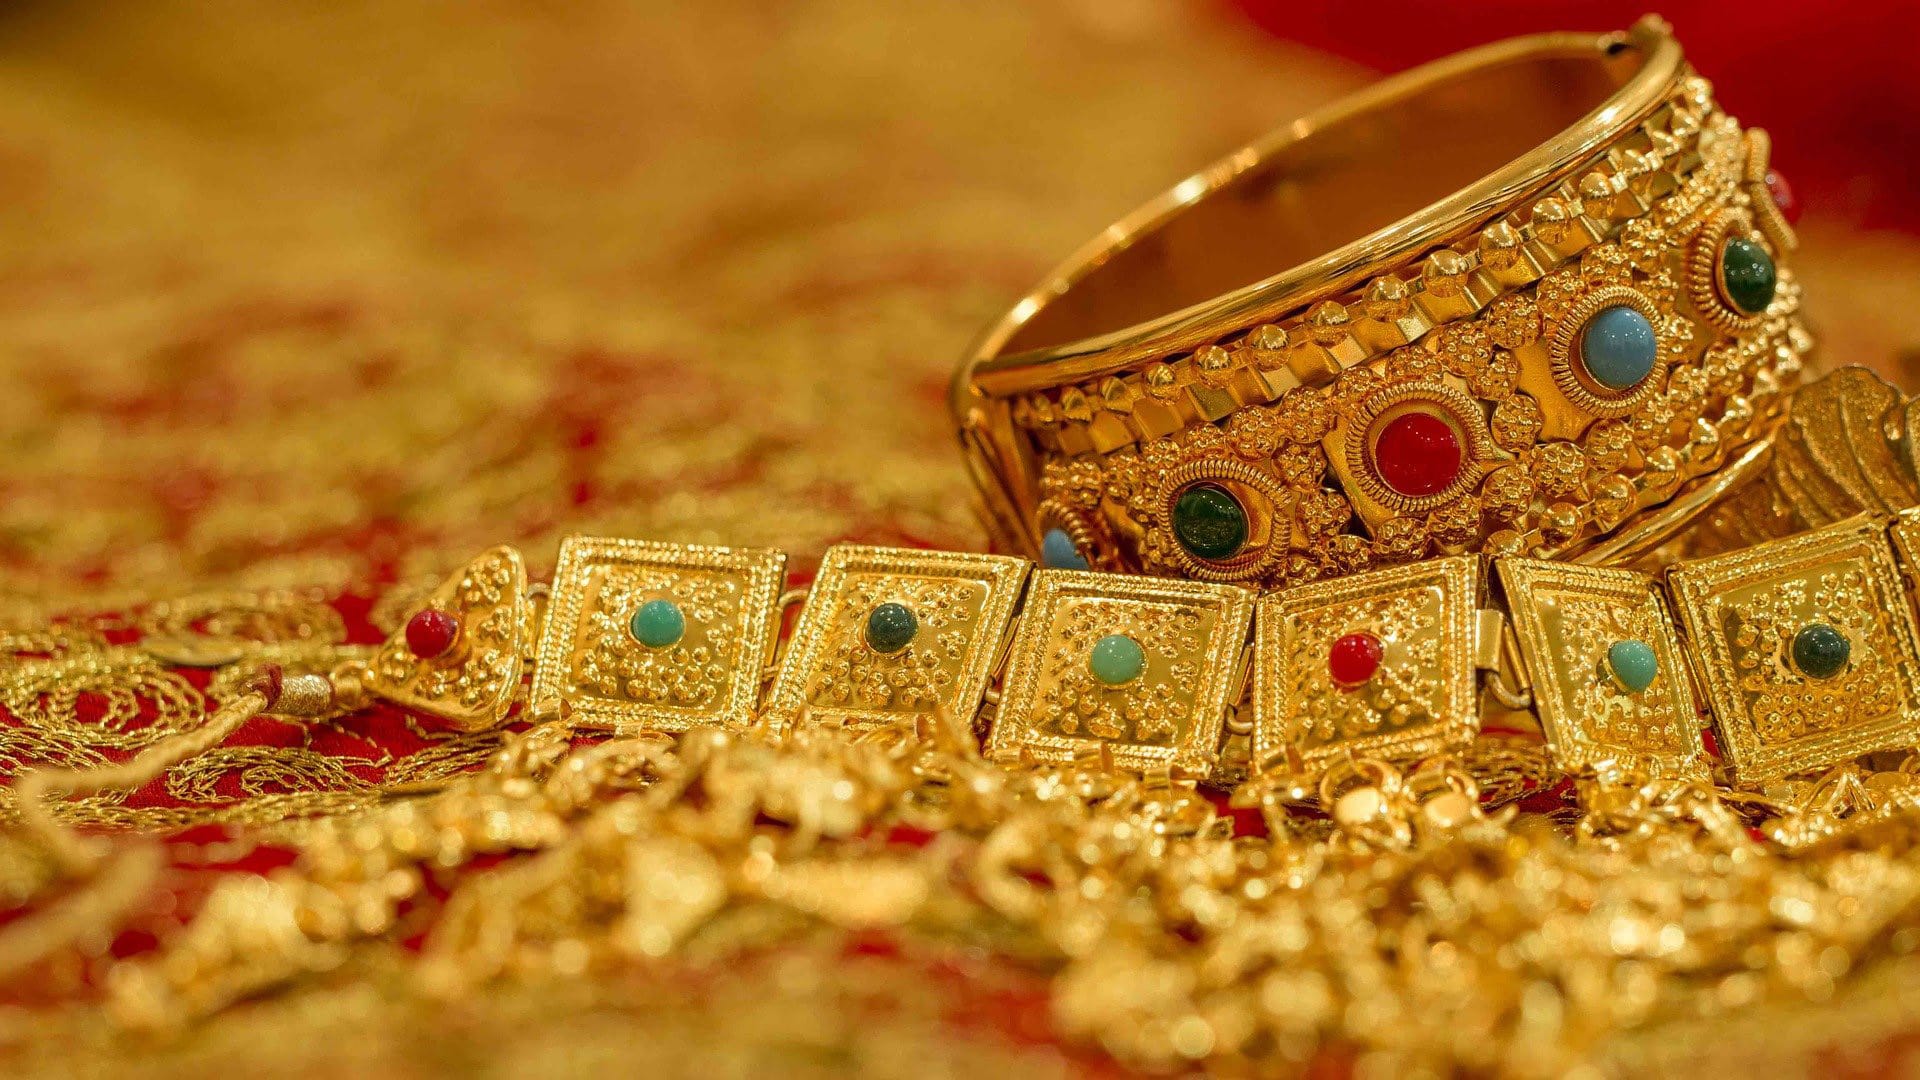 Mandatory gold hallmarking rollout smooth in 256 districts, planning for wider implementation